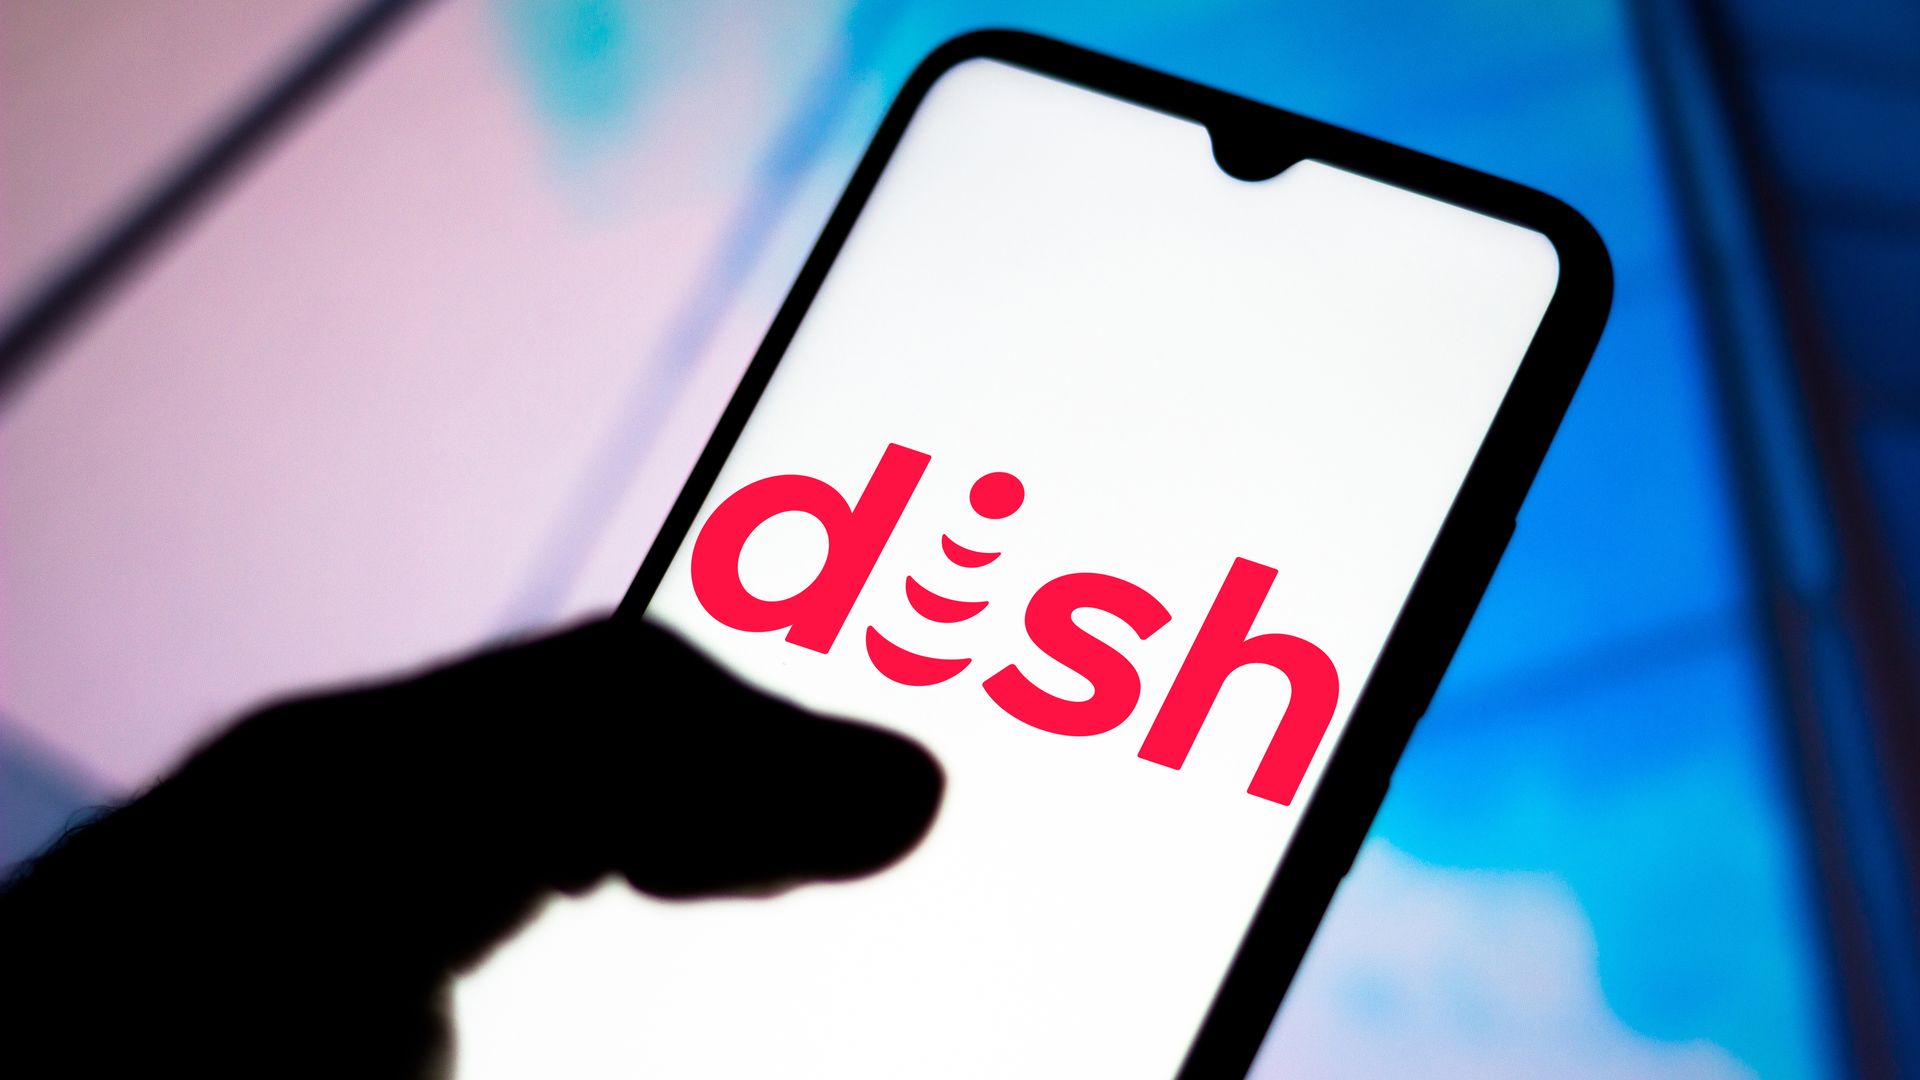 A photo illustration of a smartphone with the Dish Network logo on it.